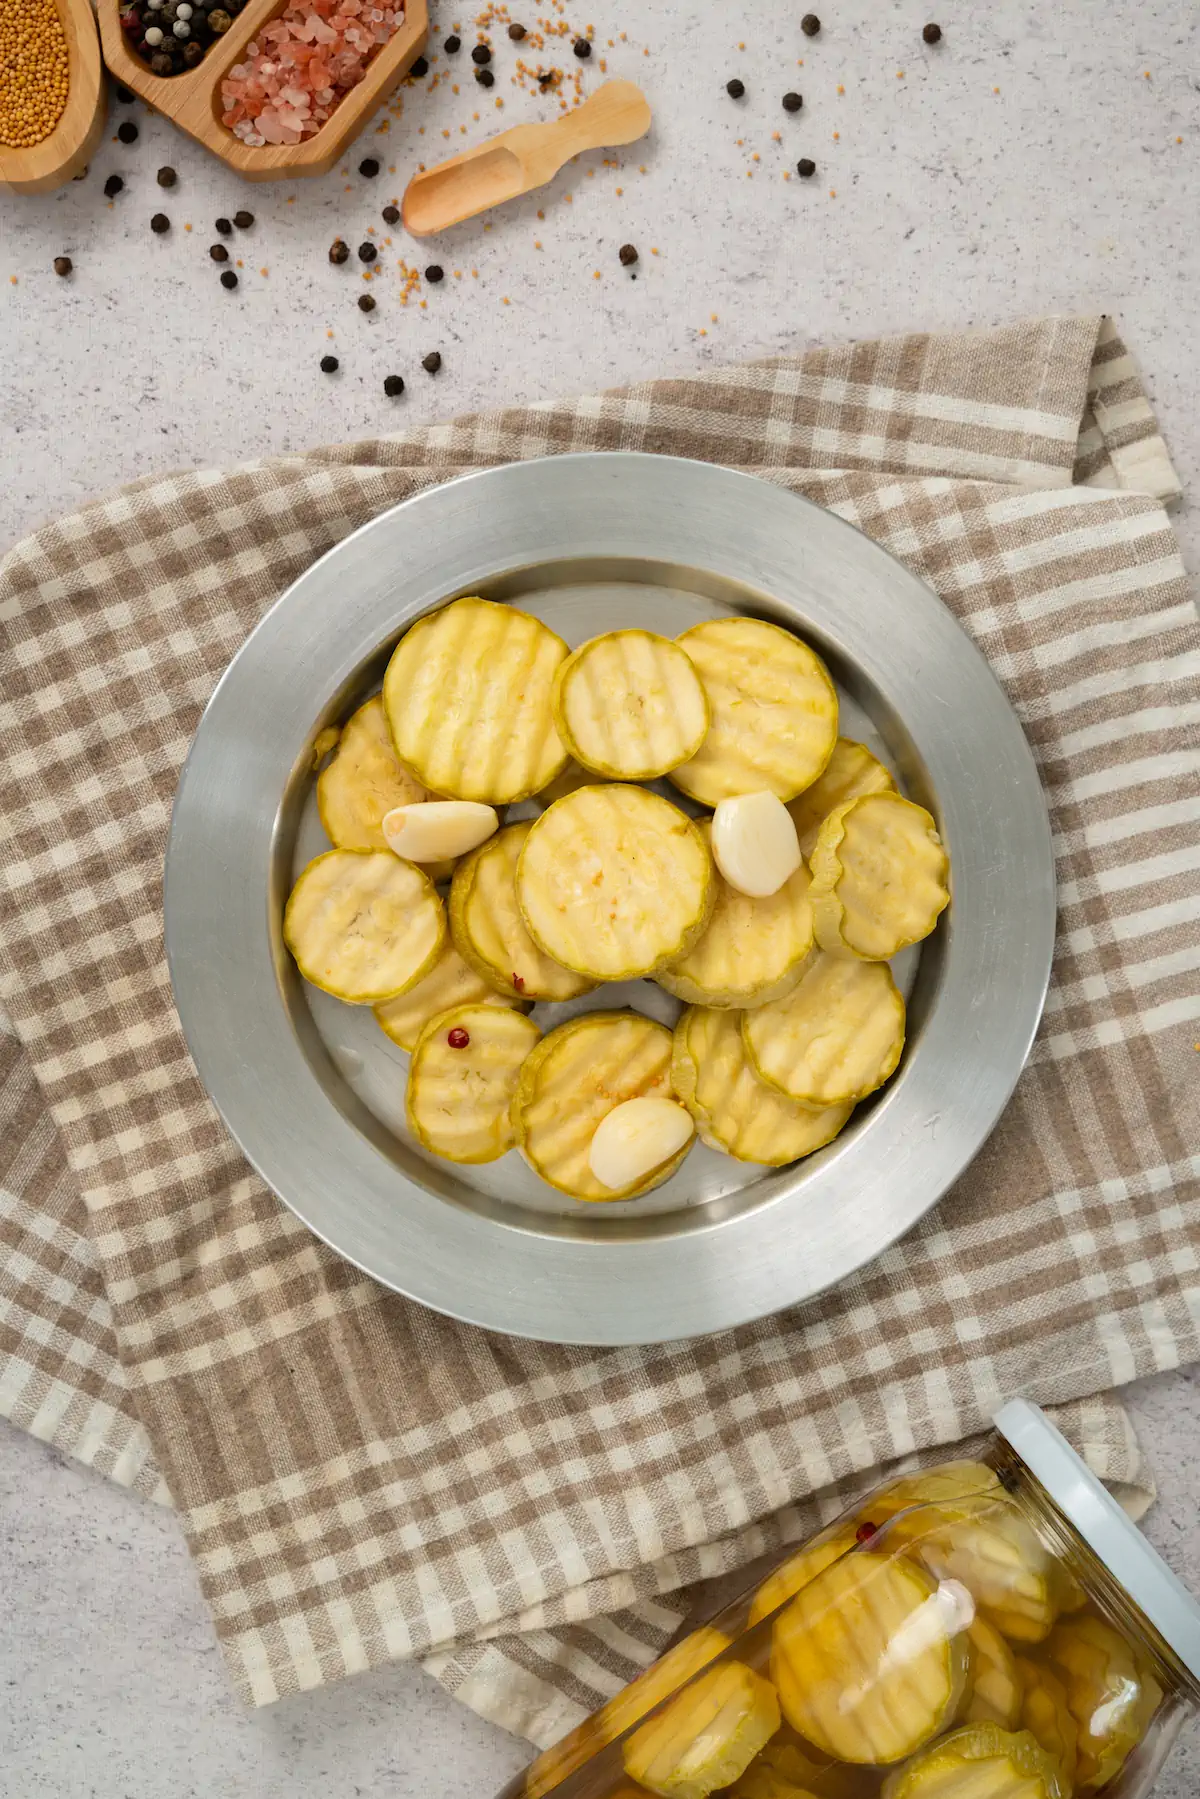 Keto sliced zucchini pickles and a couple of garlic cloves displayed on a plate alongside a jar of same pickles.